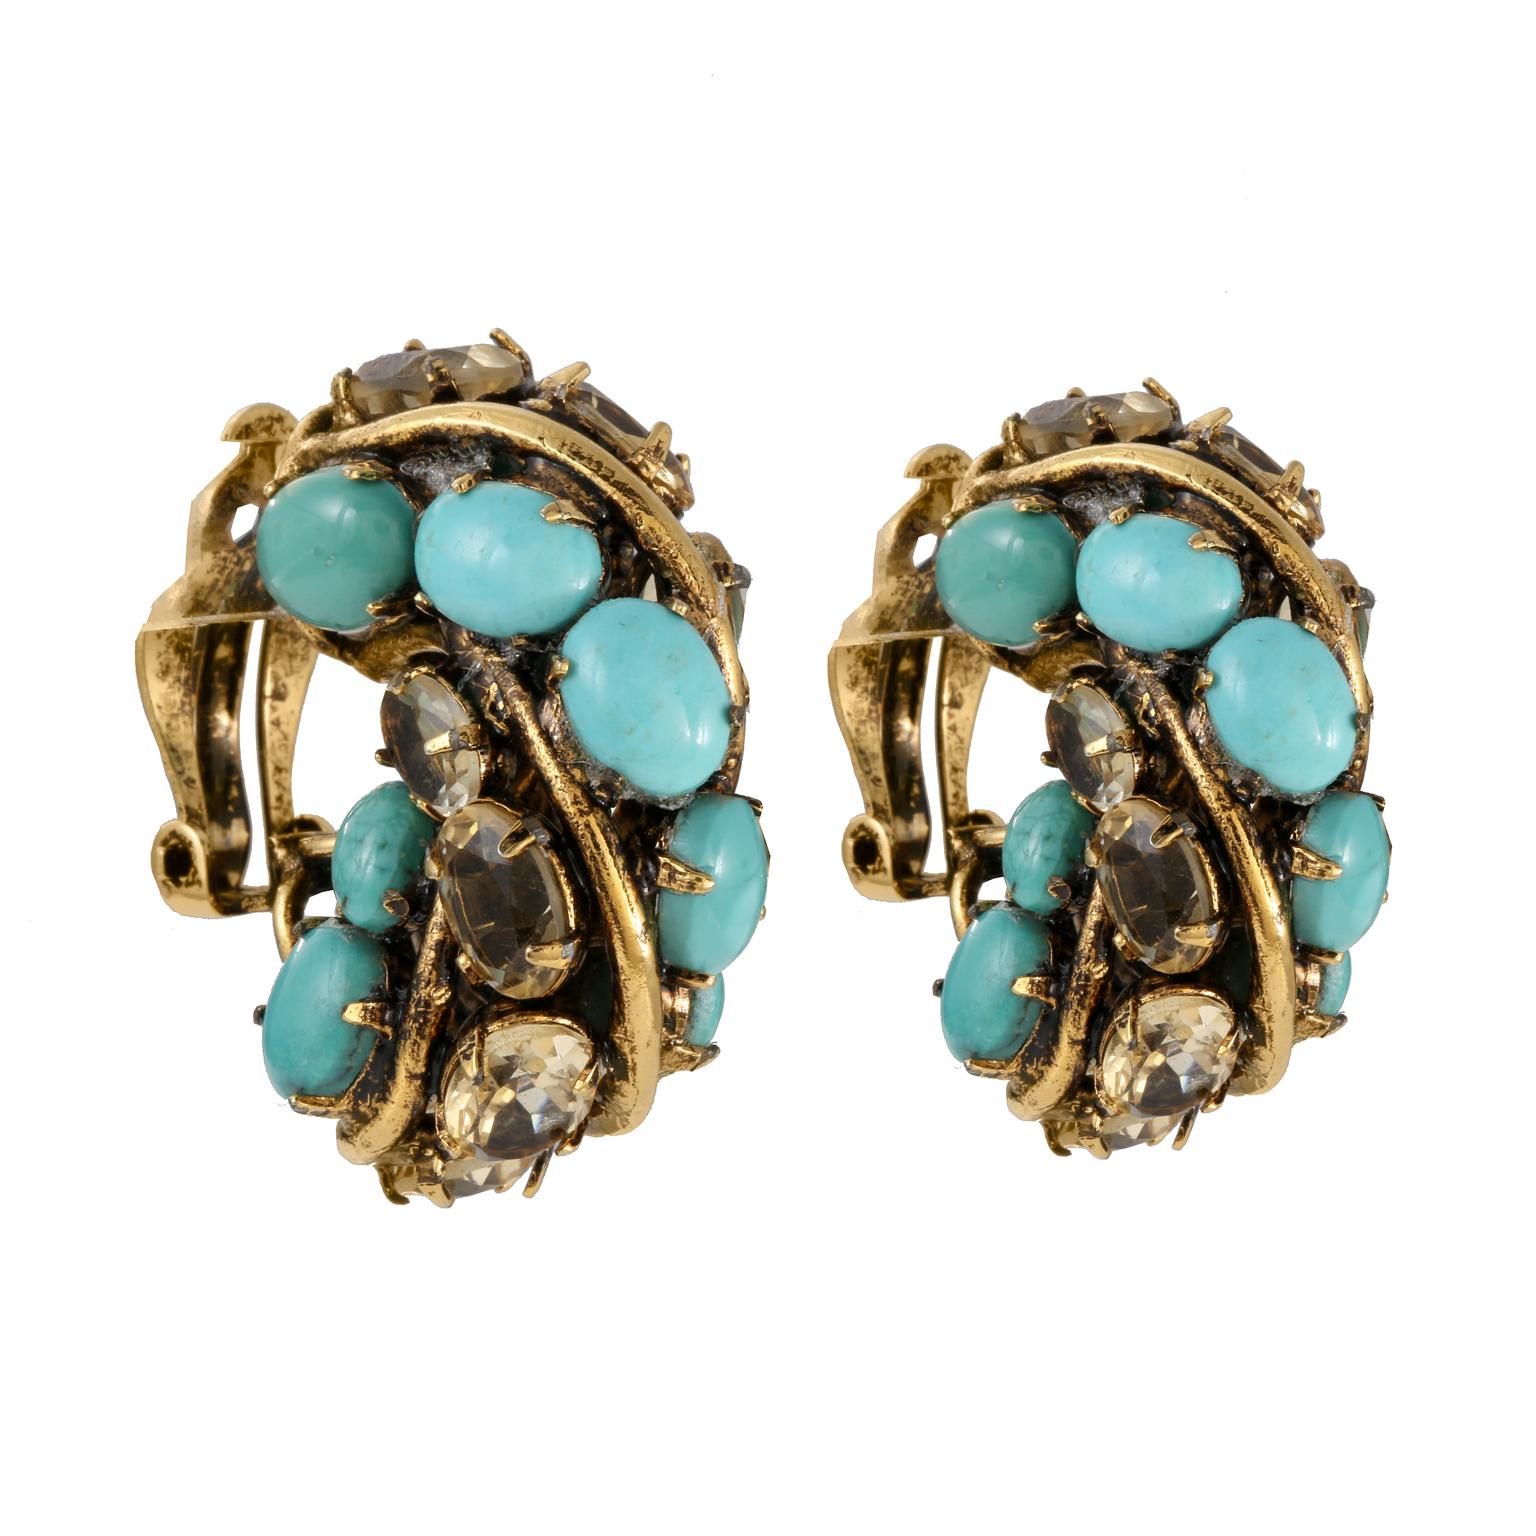 These Iradj Moini Turquoise and Crystal Earrings are in excellent condition.  Turquoise and crystal stones set in in gold tone metal.  Clip on closure.  Pouch or box included. 

